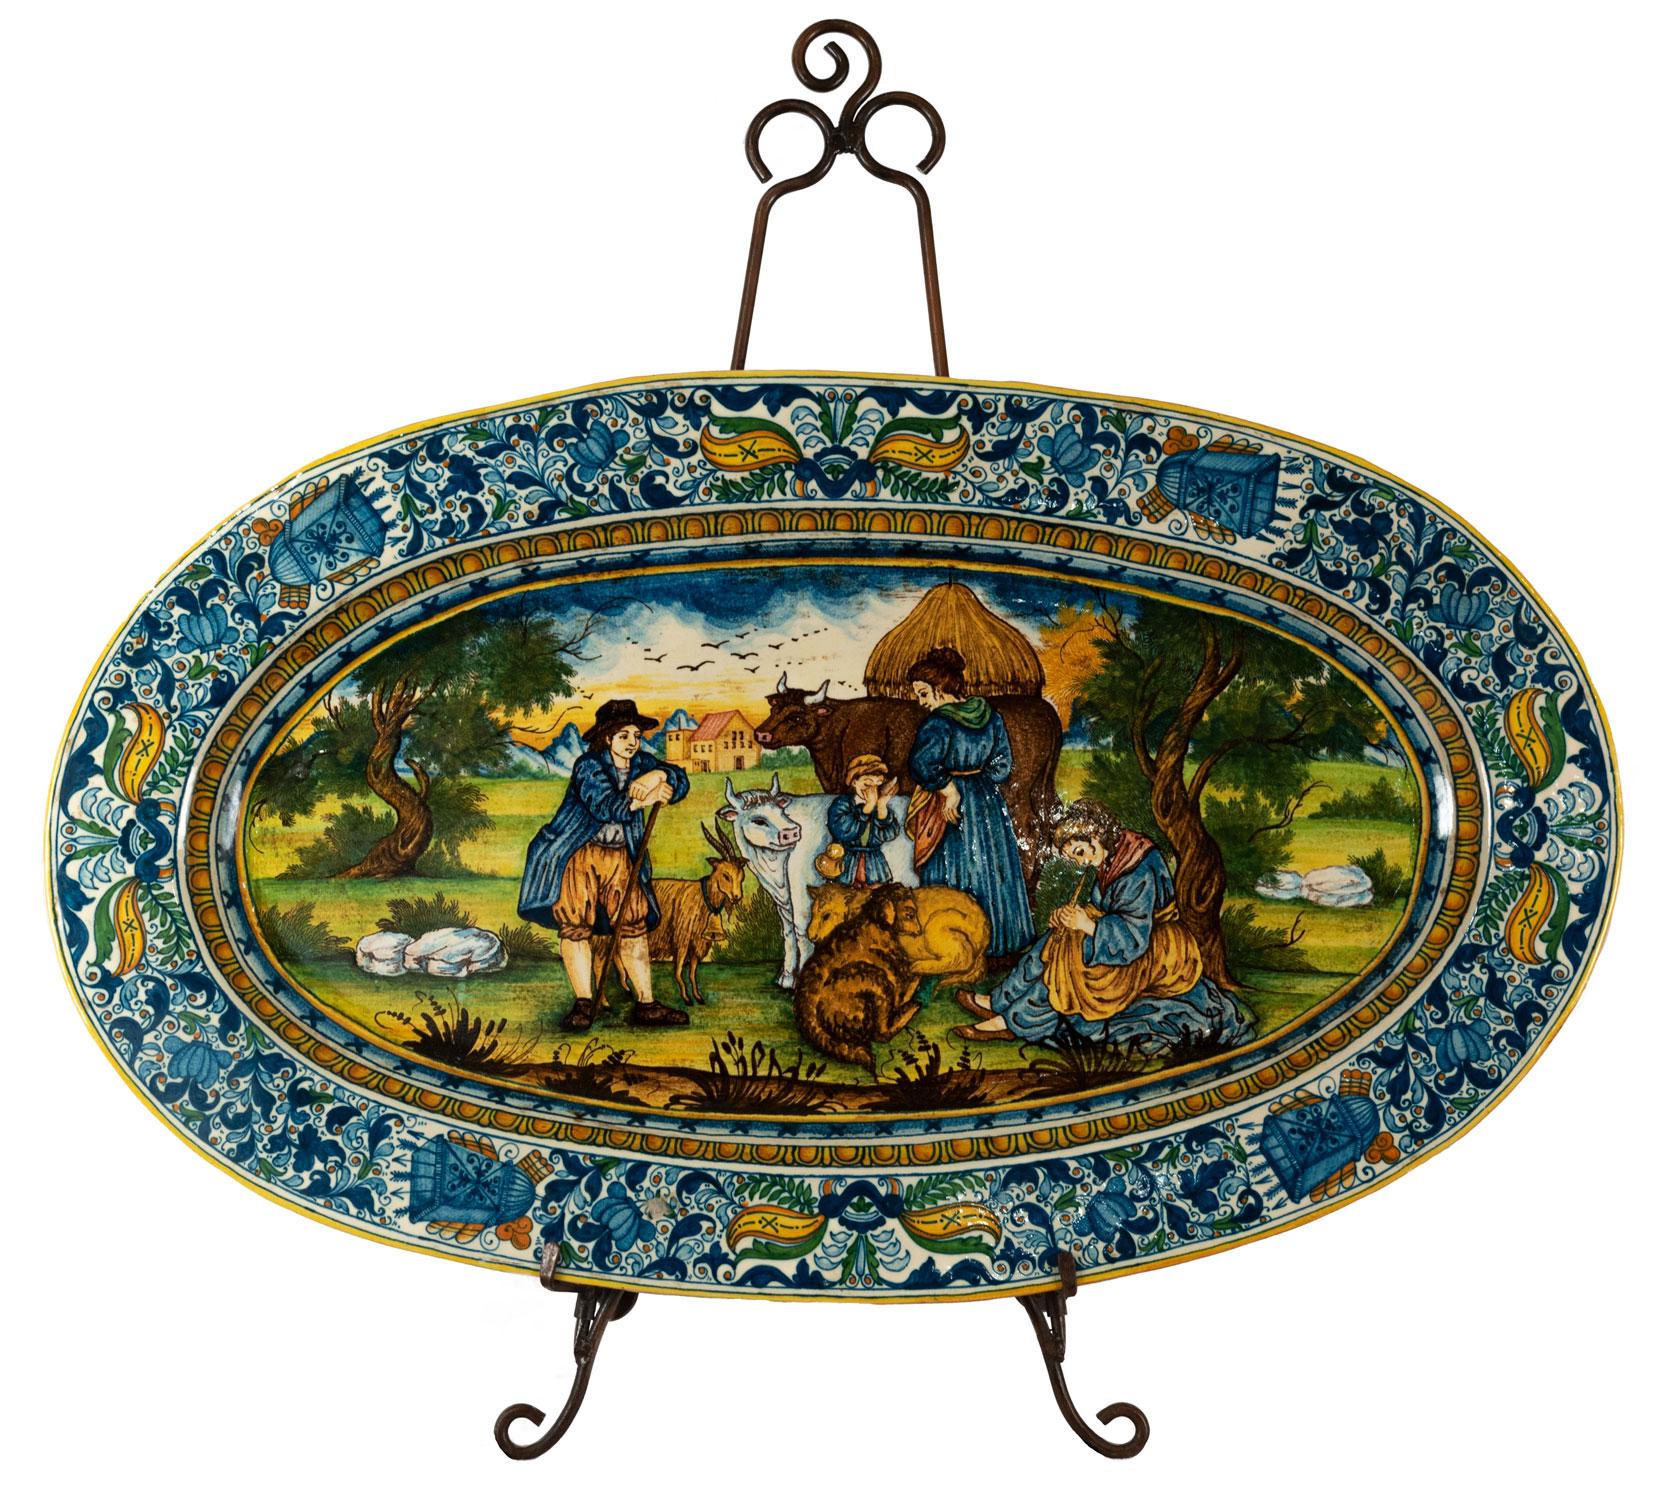 A monumental hand painted Italian Maiolica platter. Border with foliate design surrounding quivers of arrows, center reserve with a figural scene of peasants with their livestock resting under a tree.